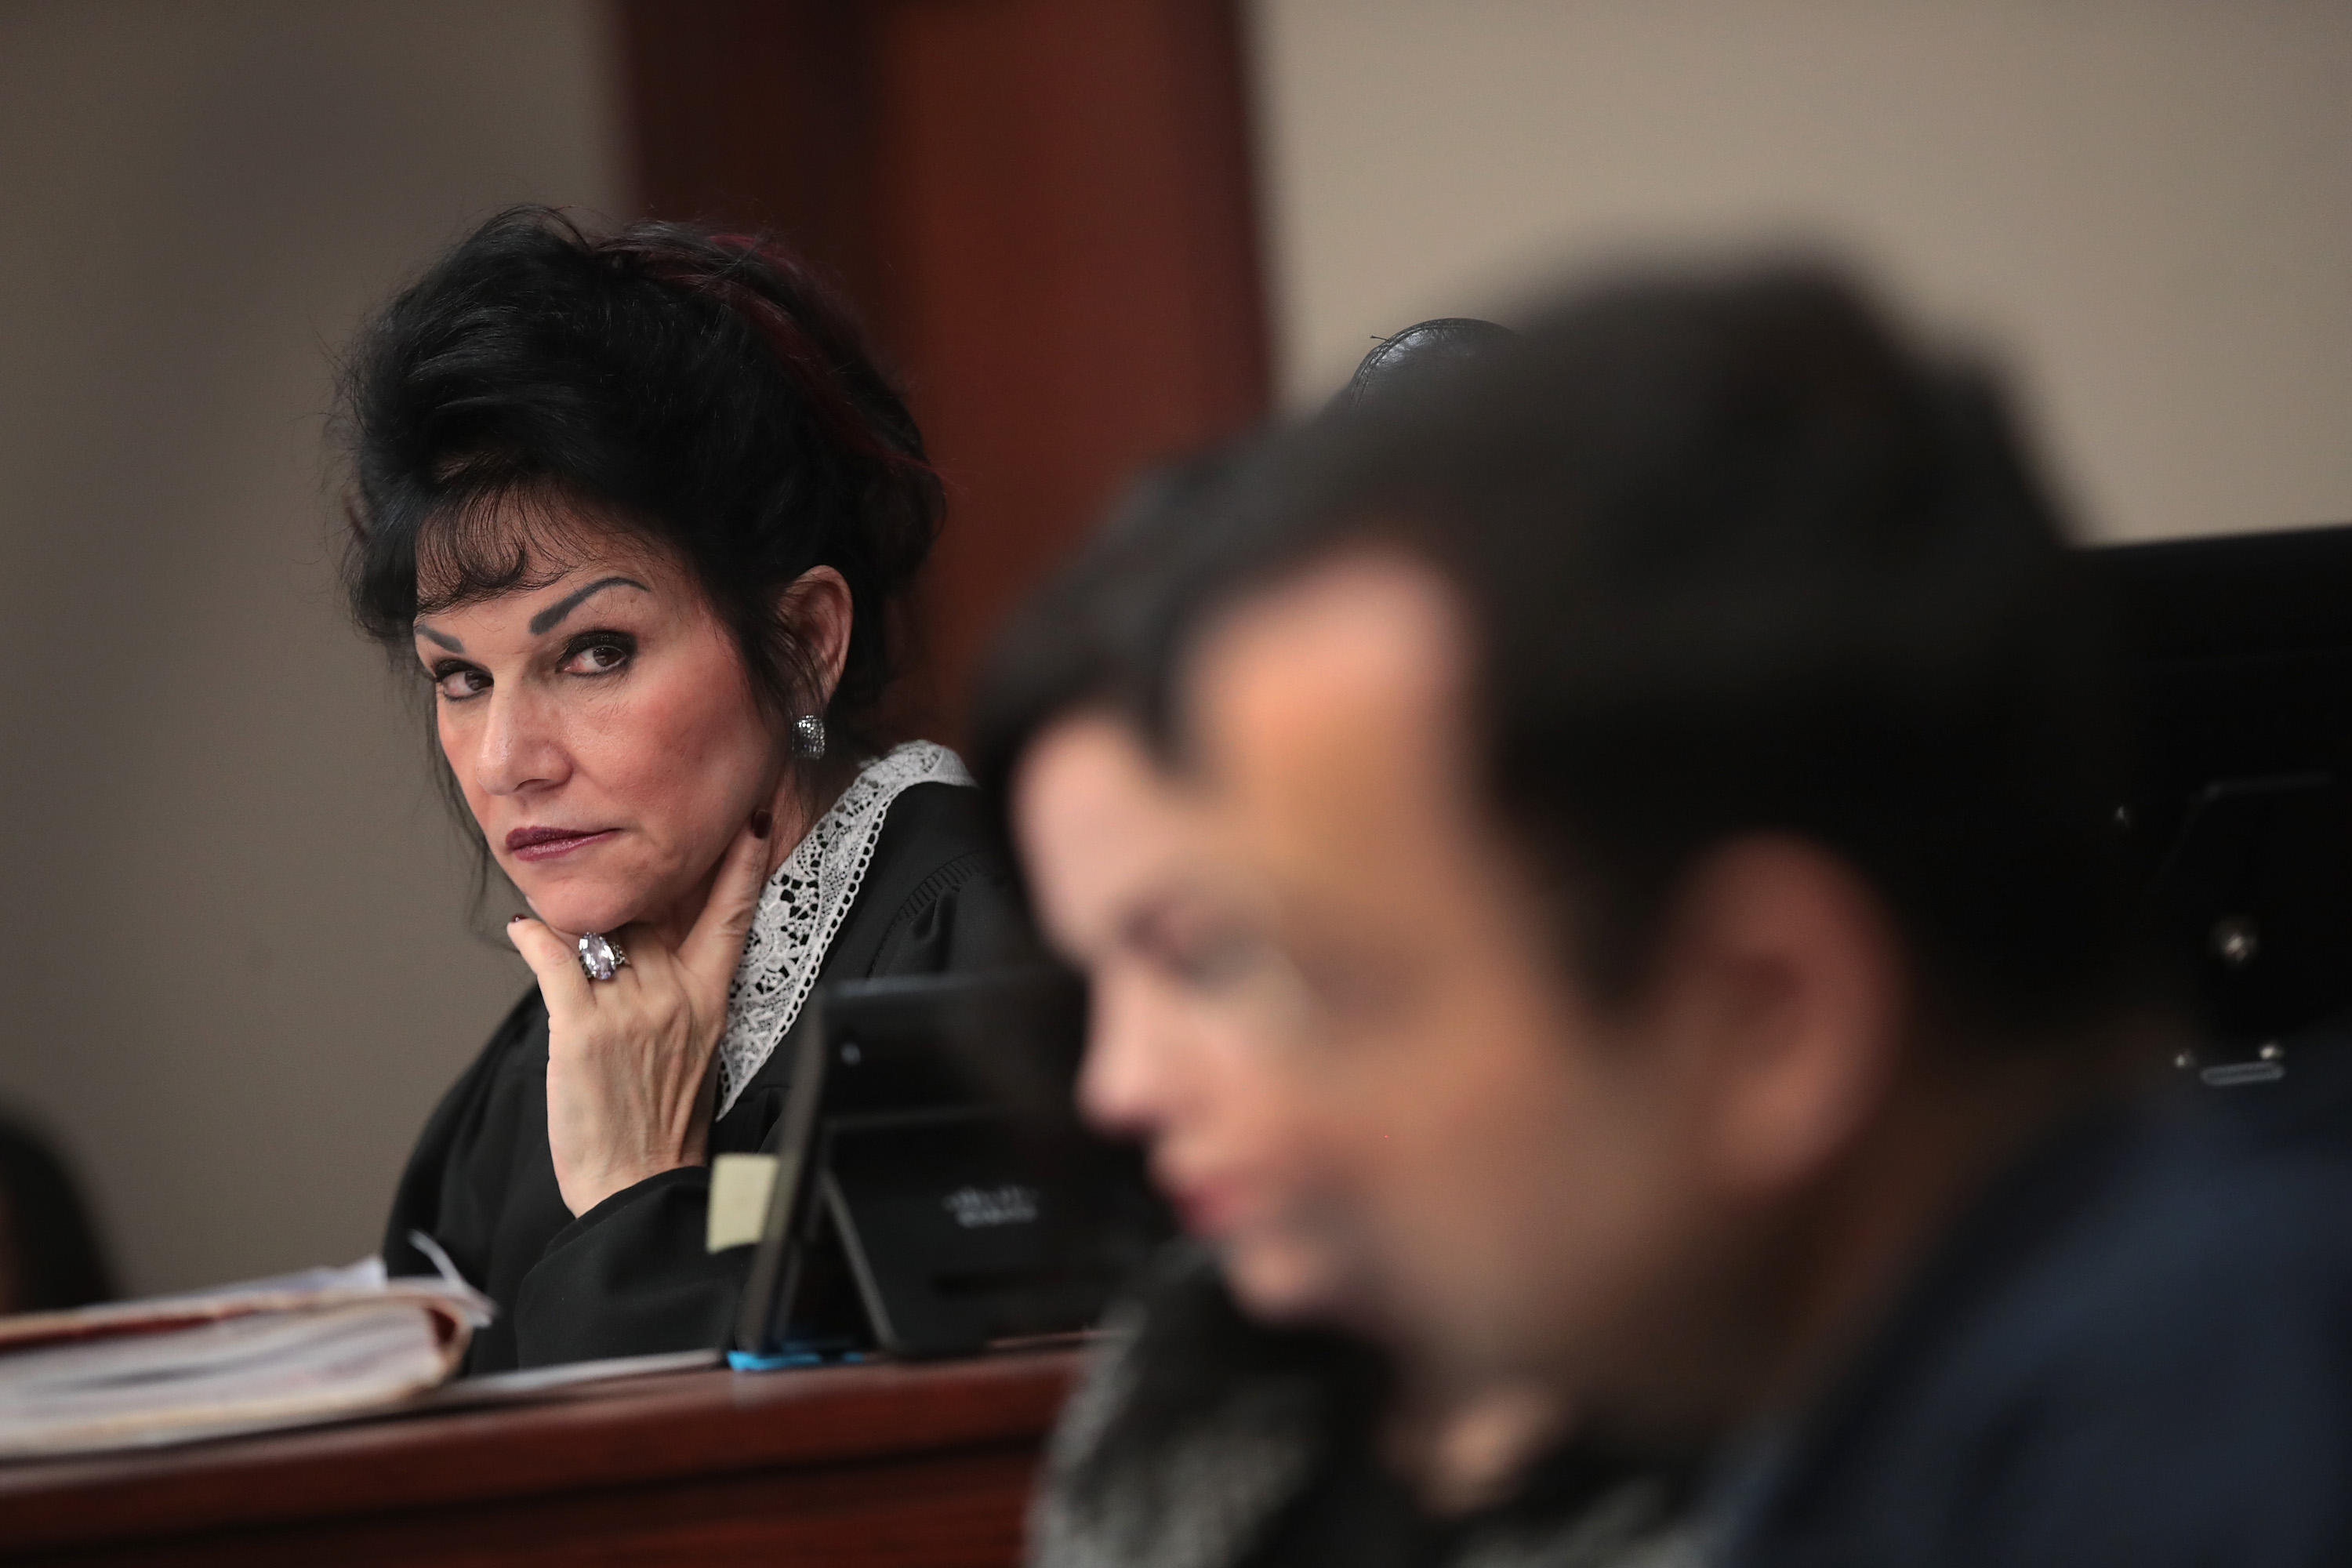 Judge Rosemarie Aquilina (L) looks at Larry Nassar (R) as he listens to a victim's impact statement by Jennifer Rood Bedford prior to being sentenced Wednesday. Photo by Scott Olson/Getty Images (Scott Olson&mdash;Getty Images)